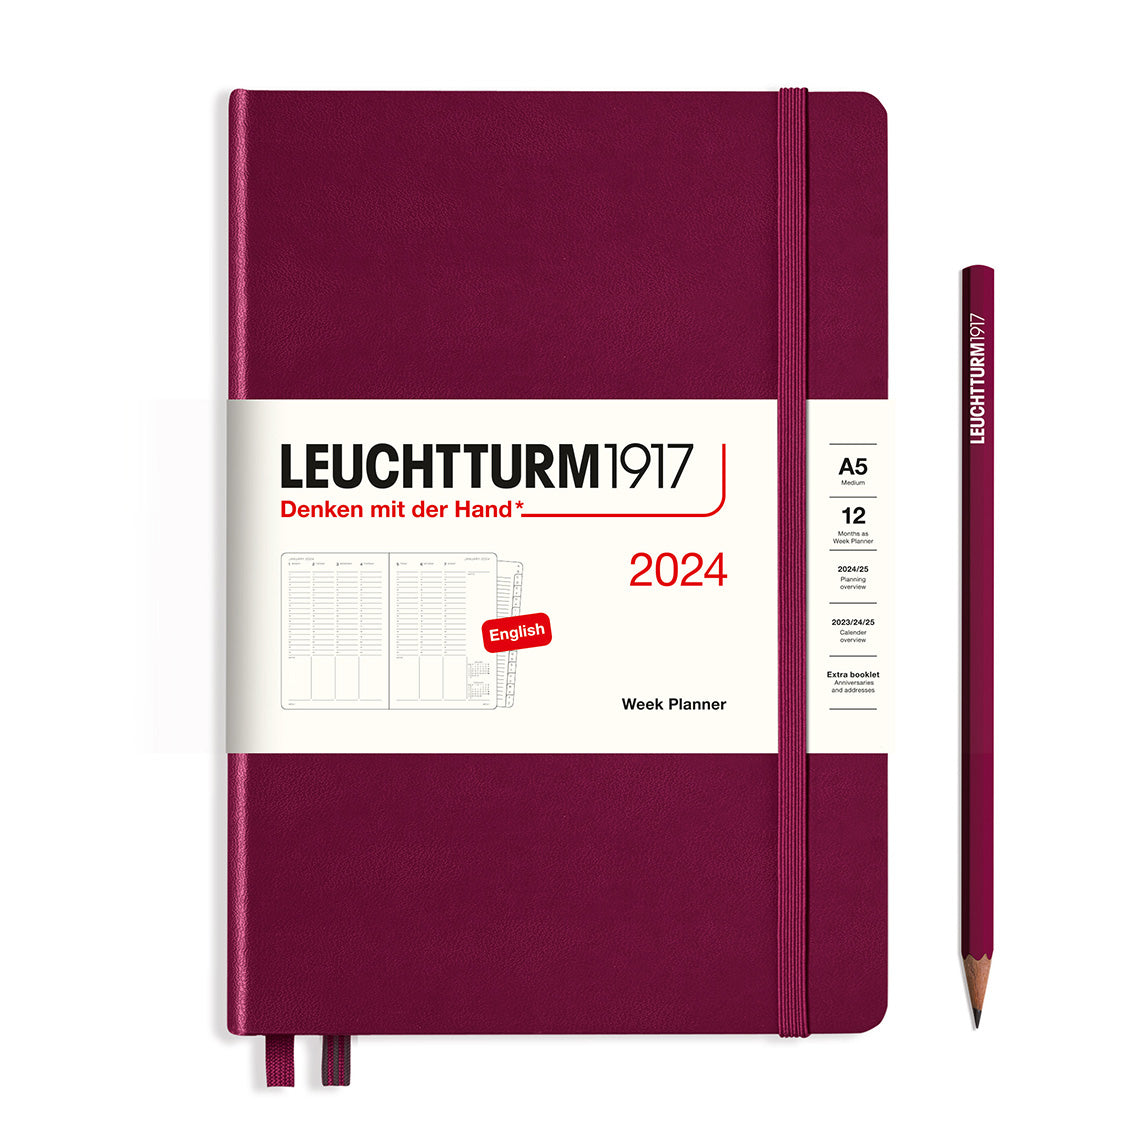 An image of a burgundy planner with a burgundy elastic band holding it together and a cream paper wrap around the middle stating the business name Leuchtturm1917, that it is for the year 2024, it is a week planner, is A5 in size and an English language version. It has an image on the wrap showing the inside layout which is a week across 2 pages set out as appointments. A burgundy pencil is shown at the side of the planner.